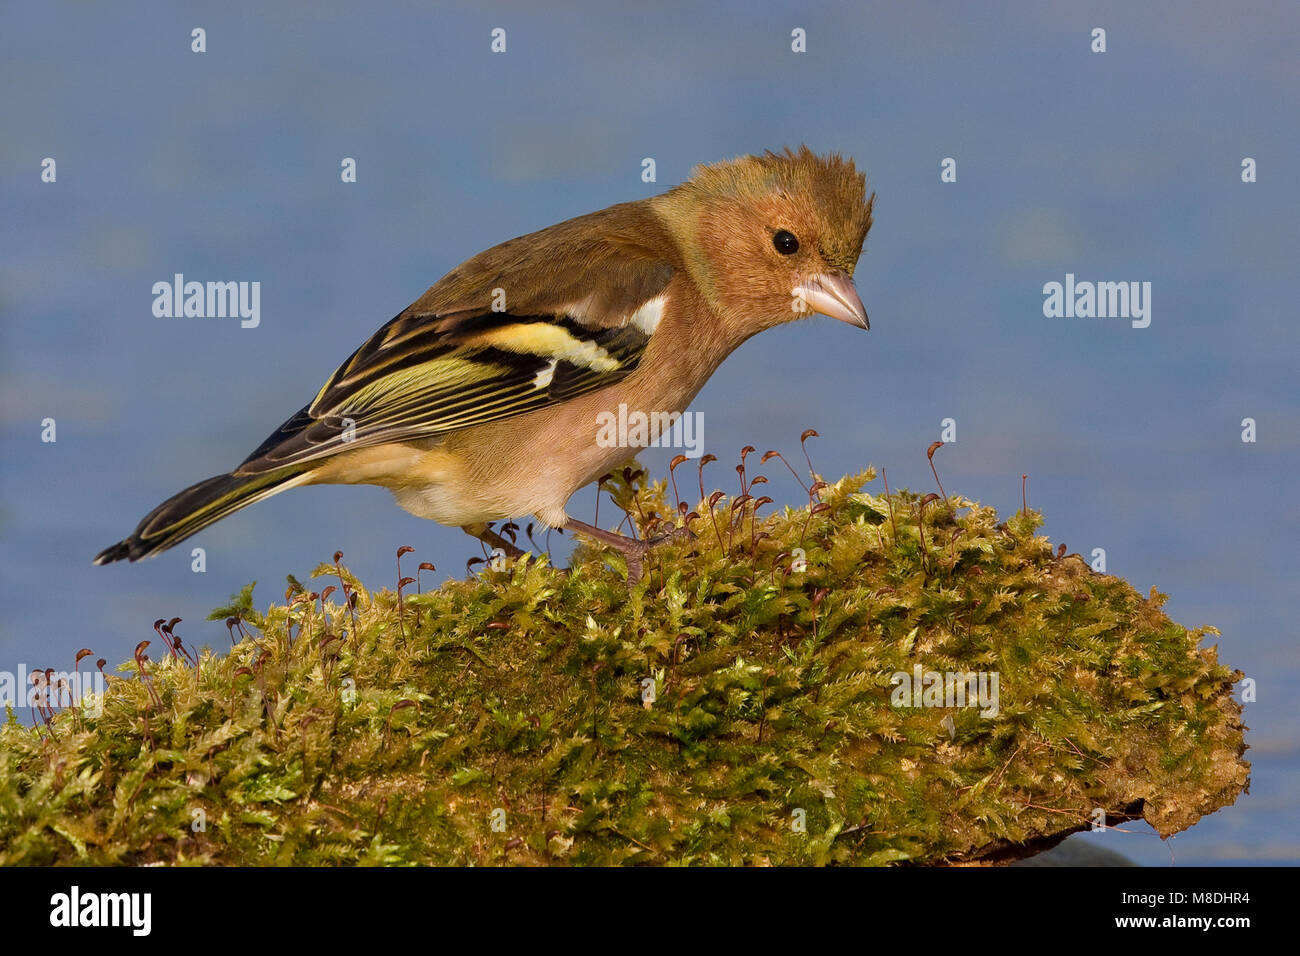 Mannetje Vink; Male Common Chaffinch Stock Photo - Alamy